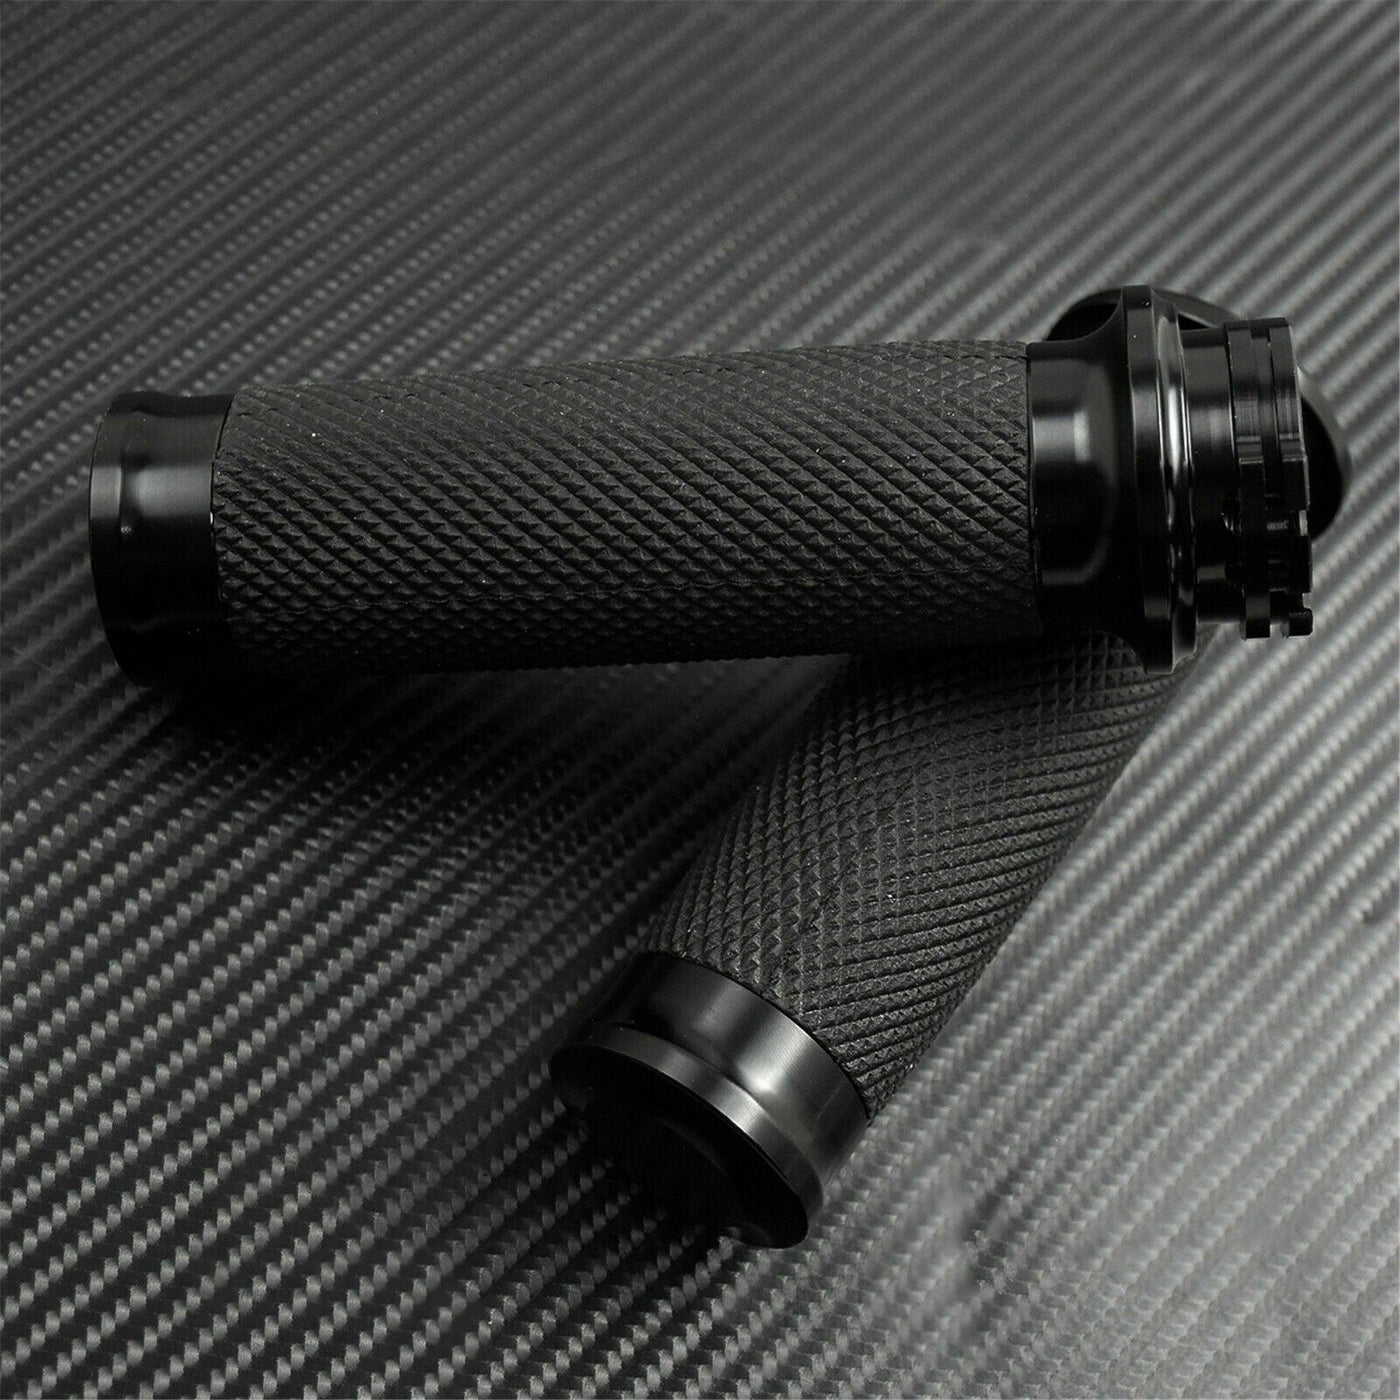 1“ Black Handle Bar Hand grips Fit For Harley Touring Sportster XL883 XL1200 - Moto Life Products